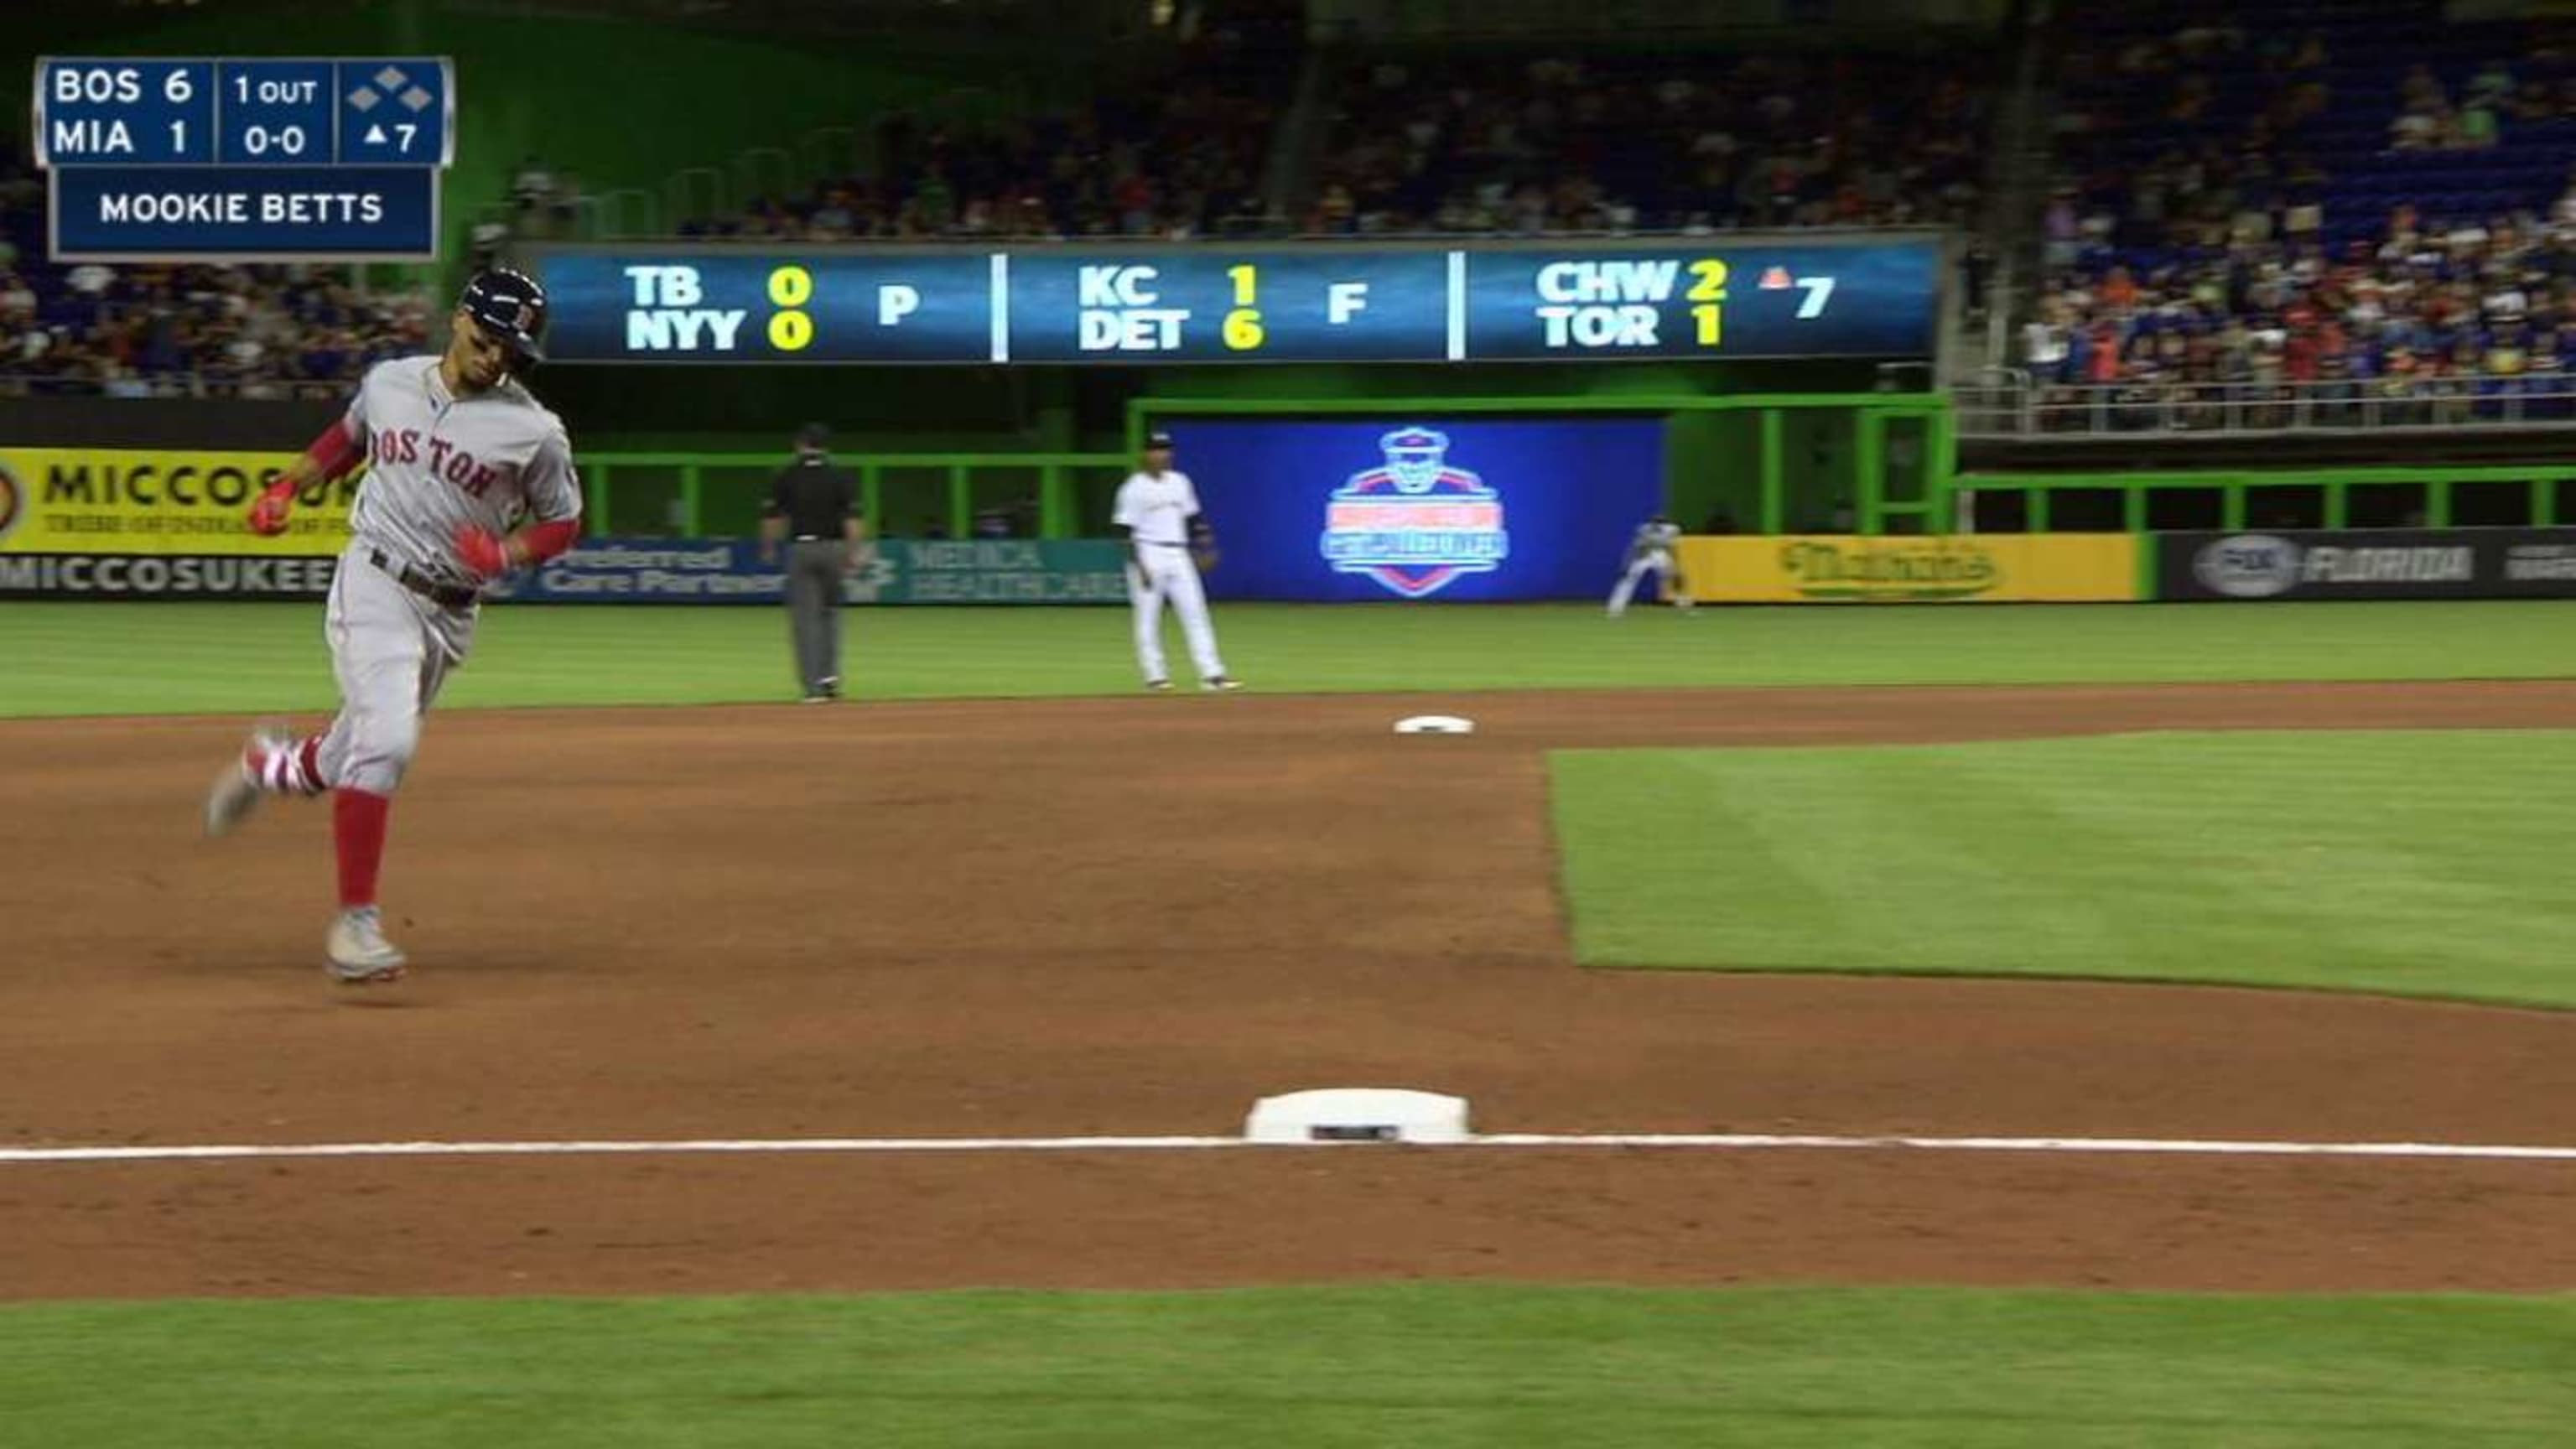 Don Mattingly preaching small ball offensive strategy for Marlins